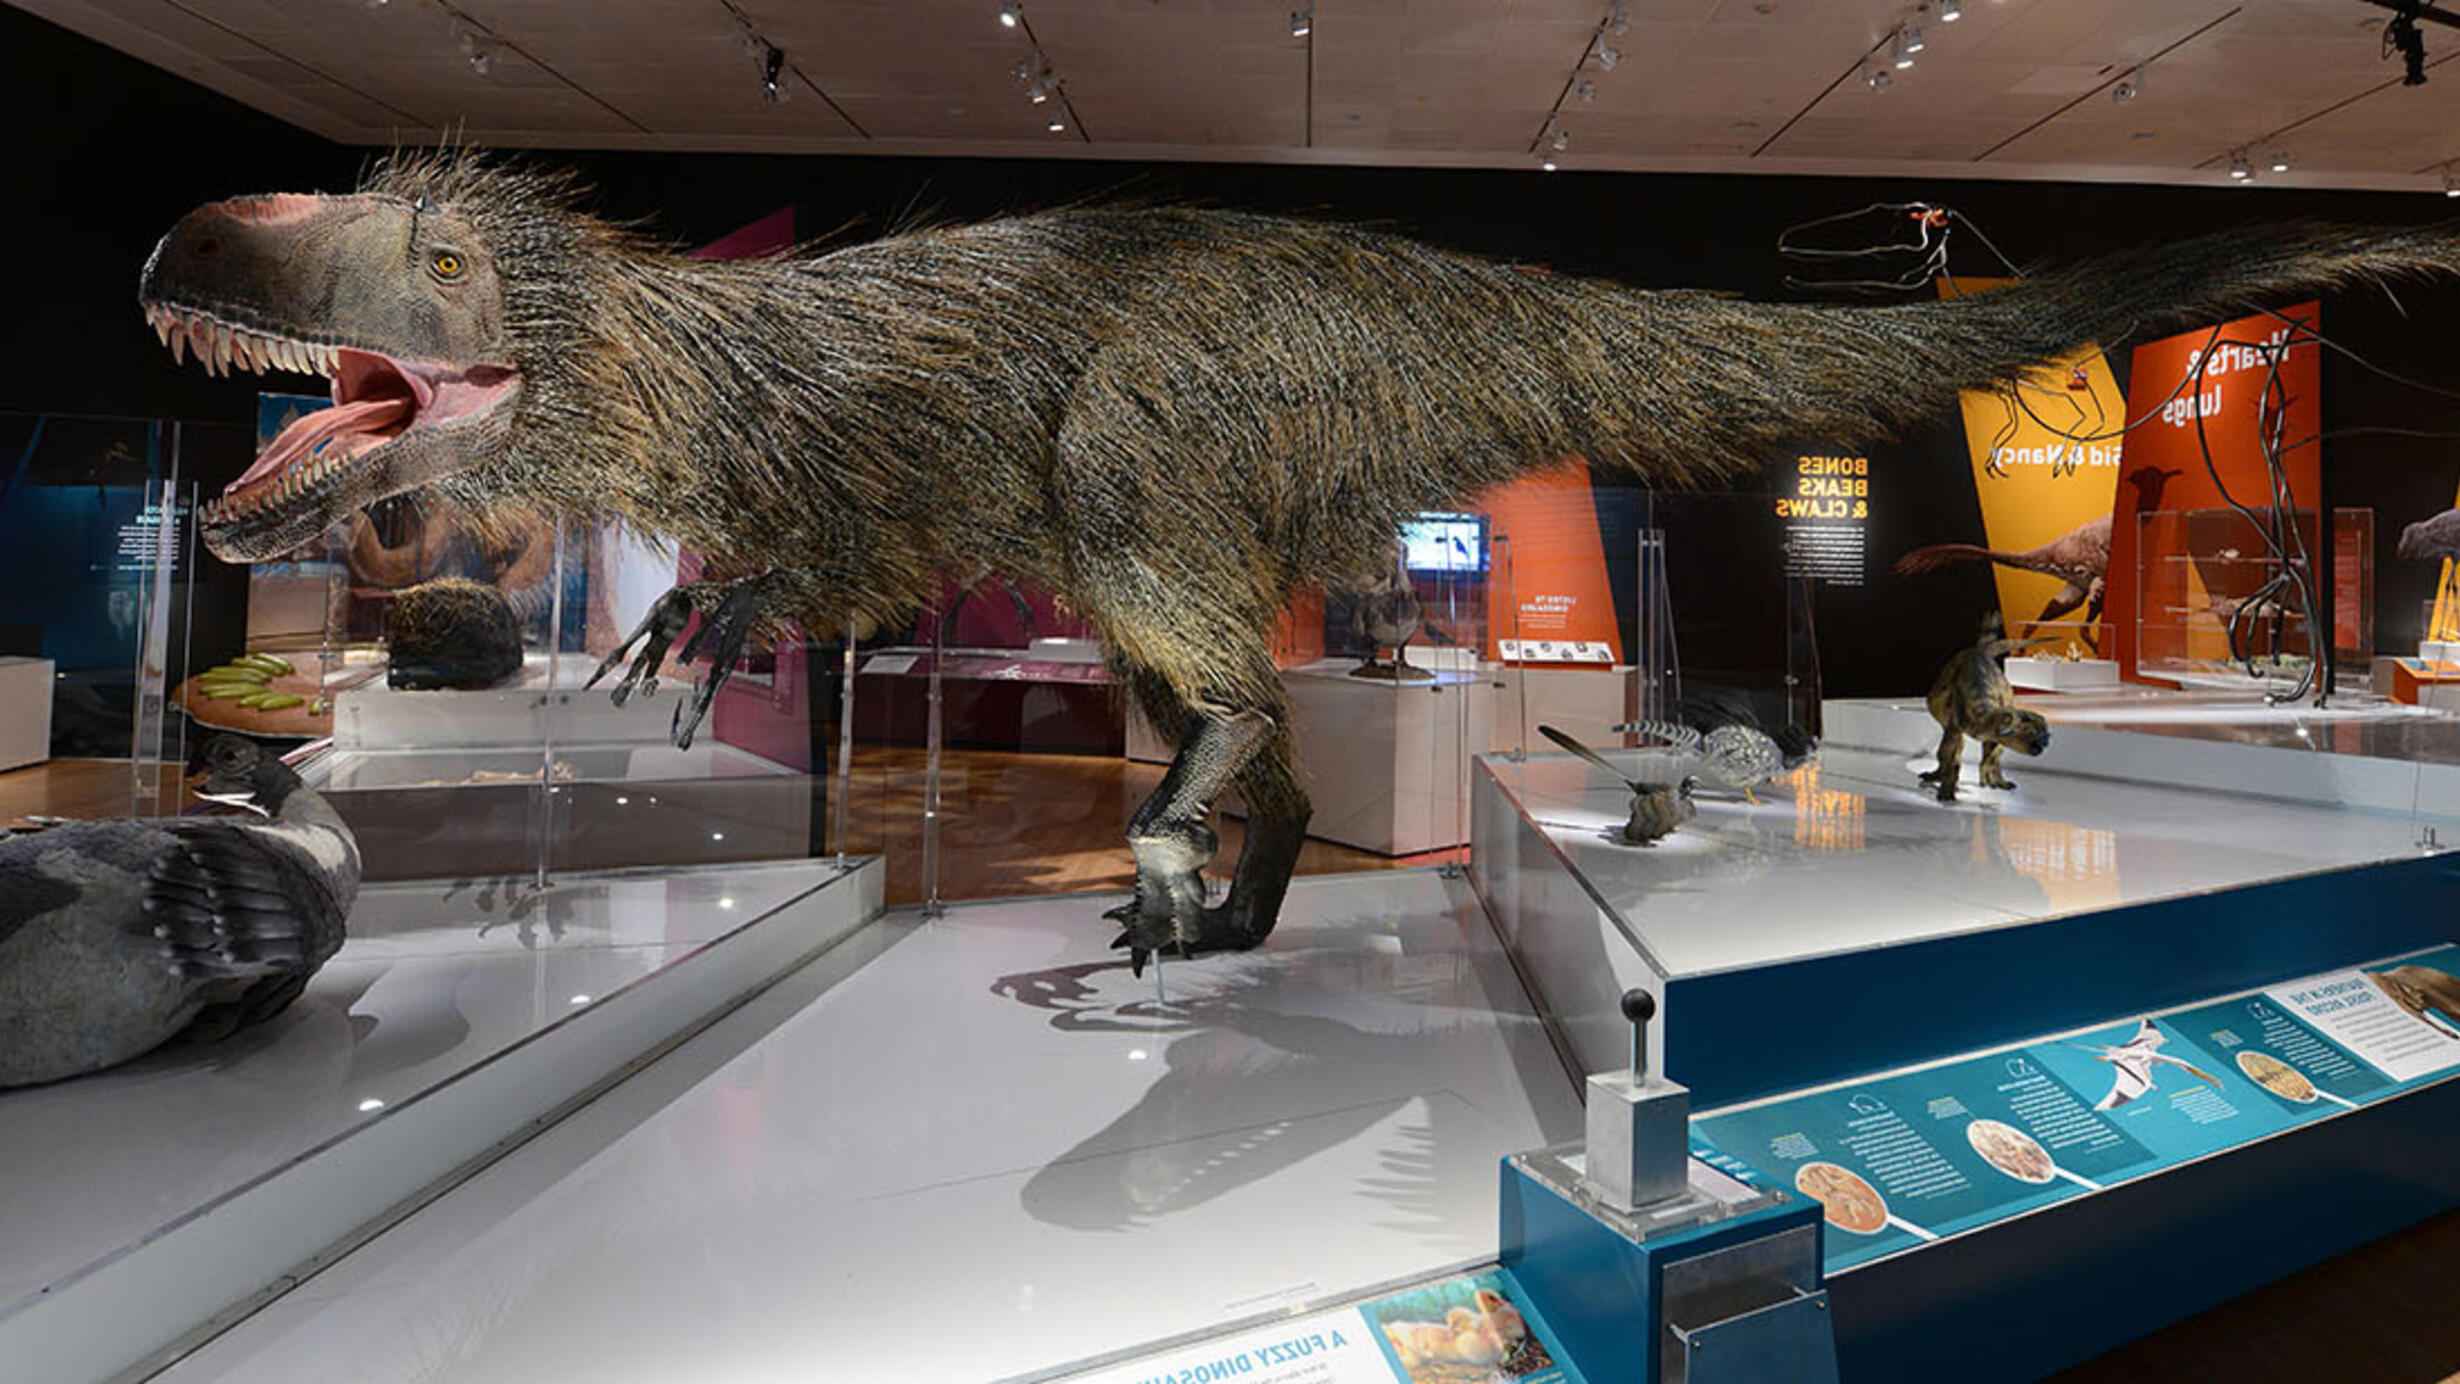 Model of a dinosaur with short arms, long tail, and open mouth full of sharp teeth, covered in two-toned hair from the neck to tail.